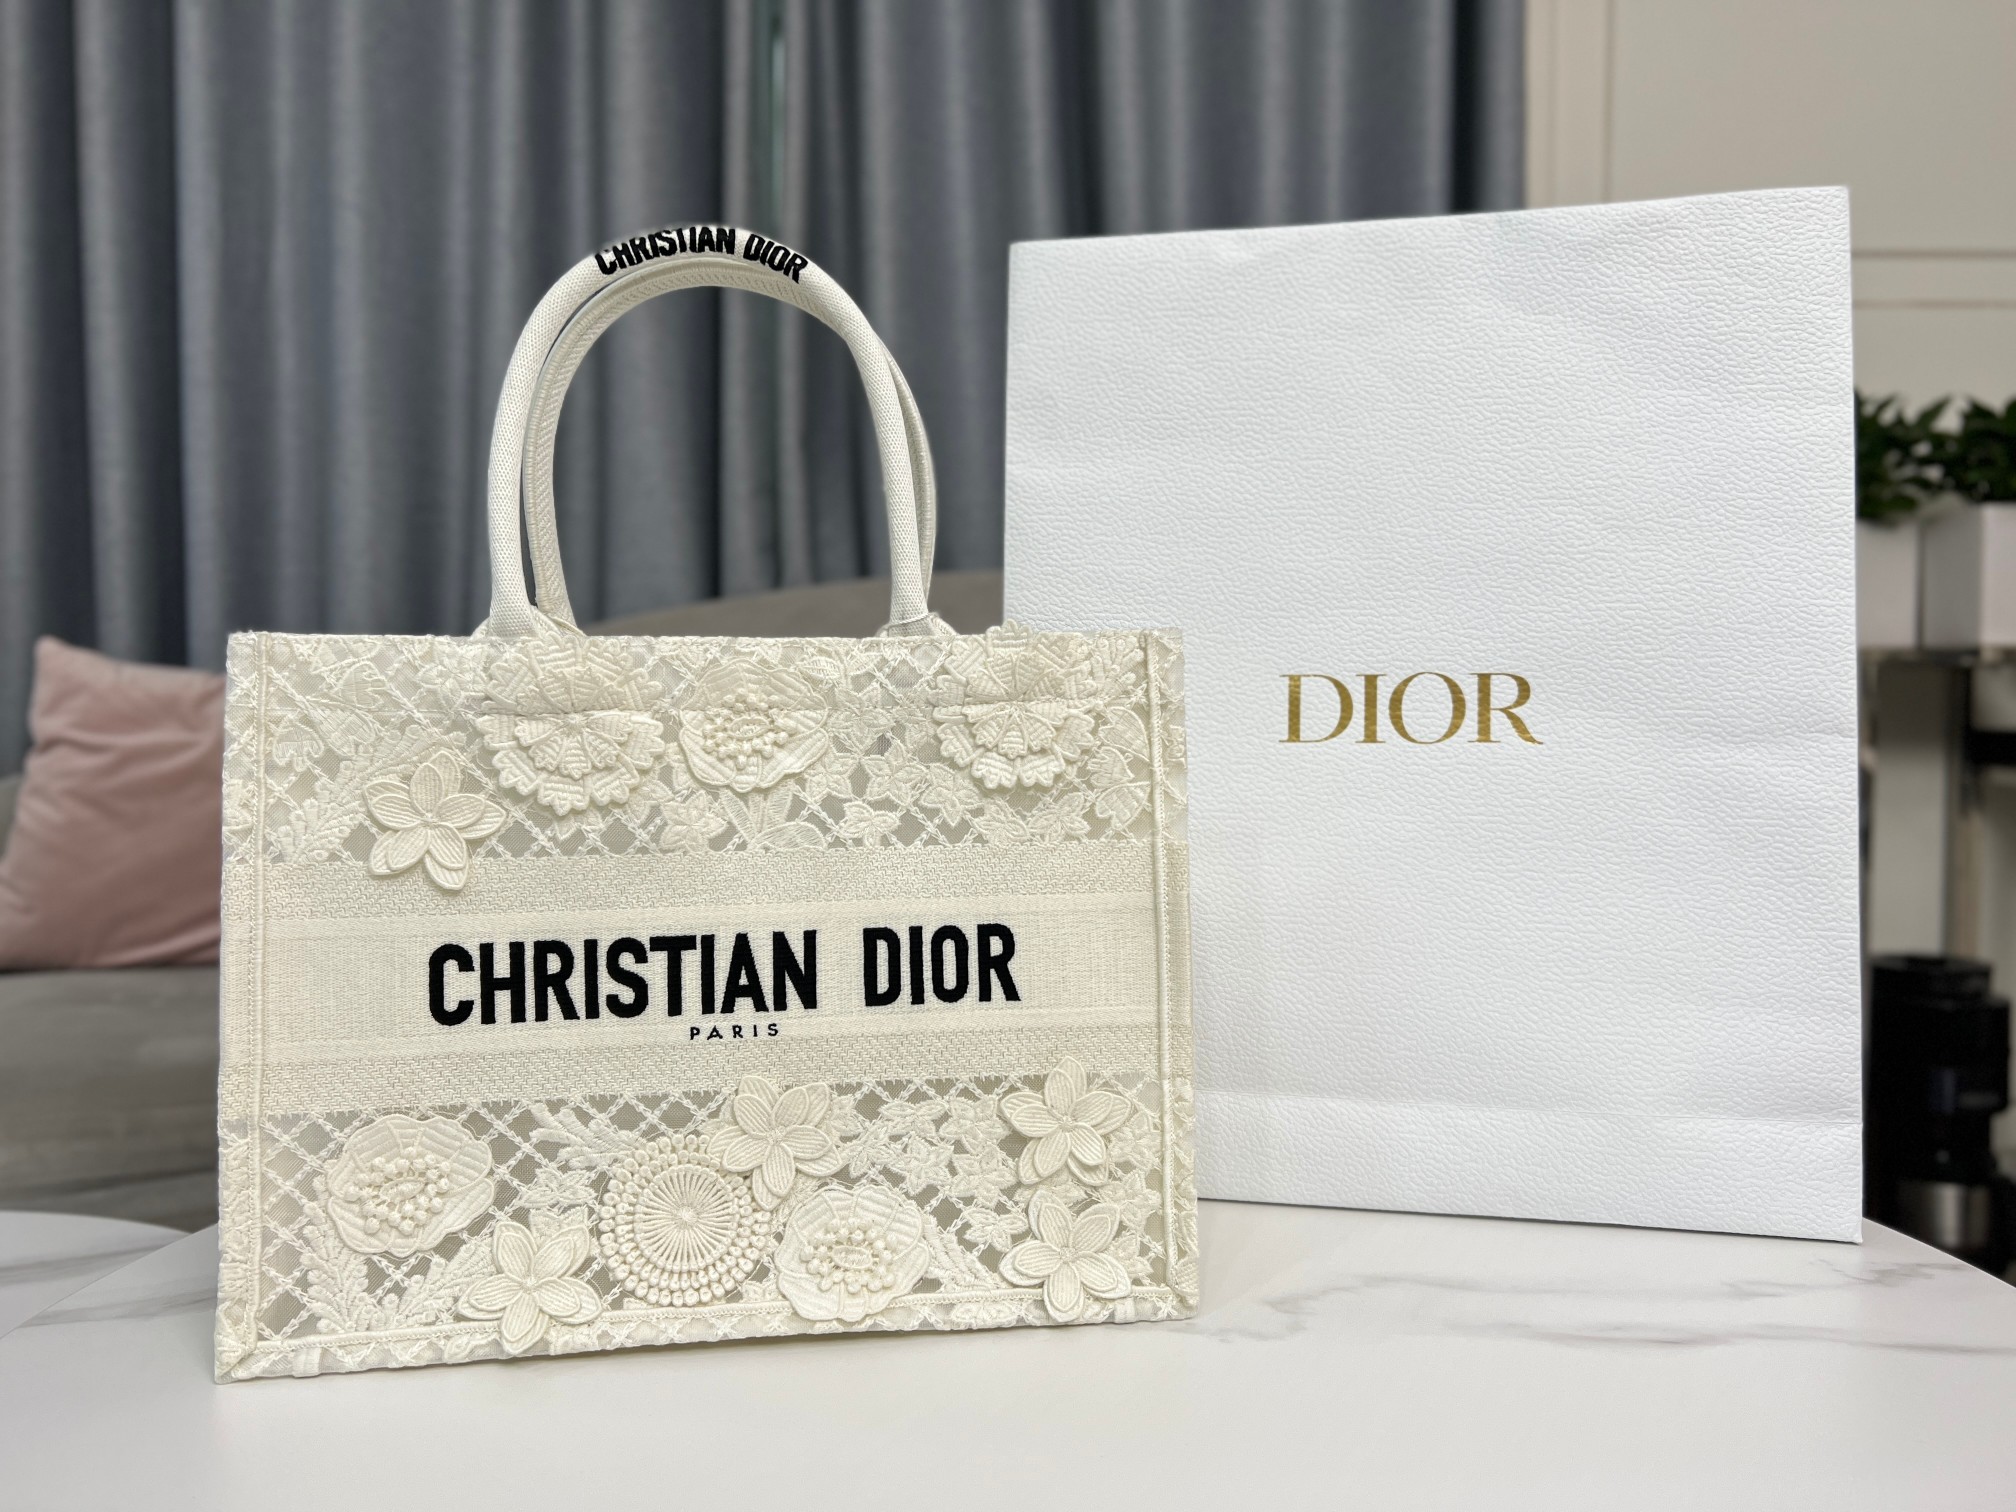 Dior Book Tote Buy
 Handbags Tote Bags White Embroidery Lace